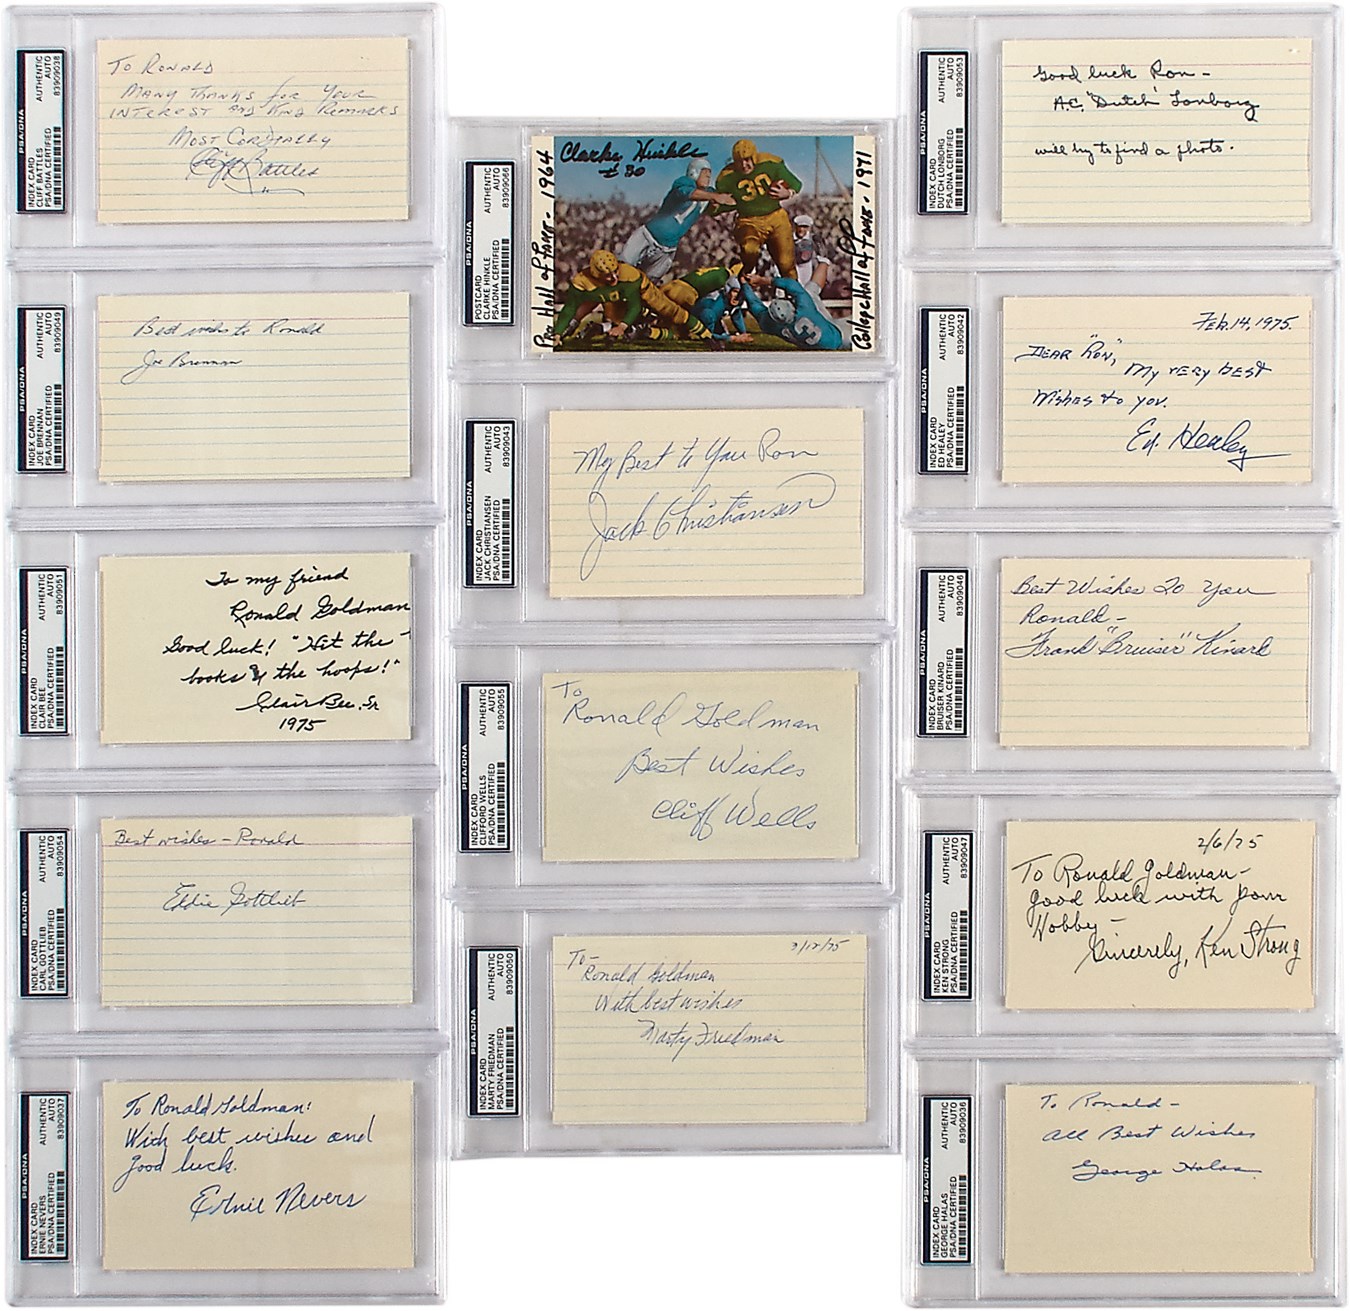 Vintage Football & Basketball Autographed Index Cards with Ken Strong (PSA/DNA)